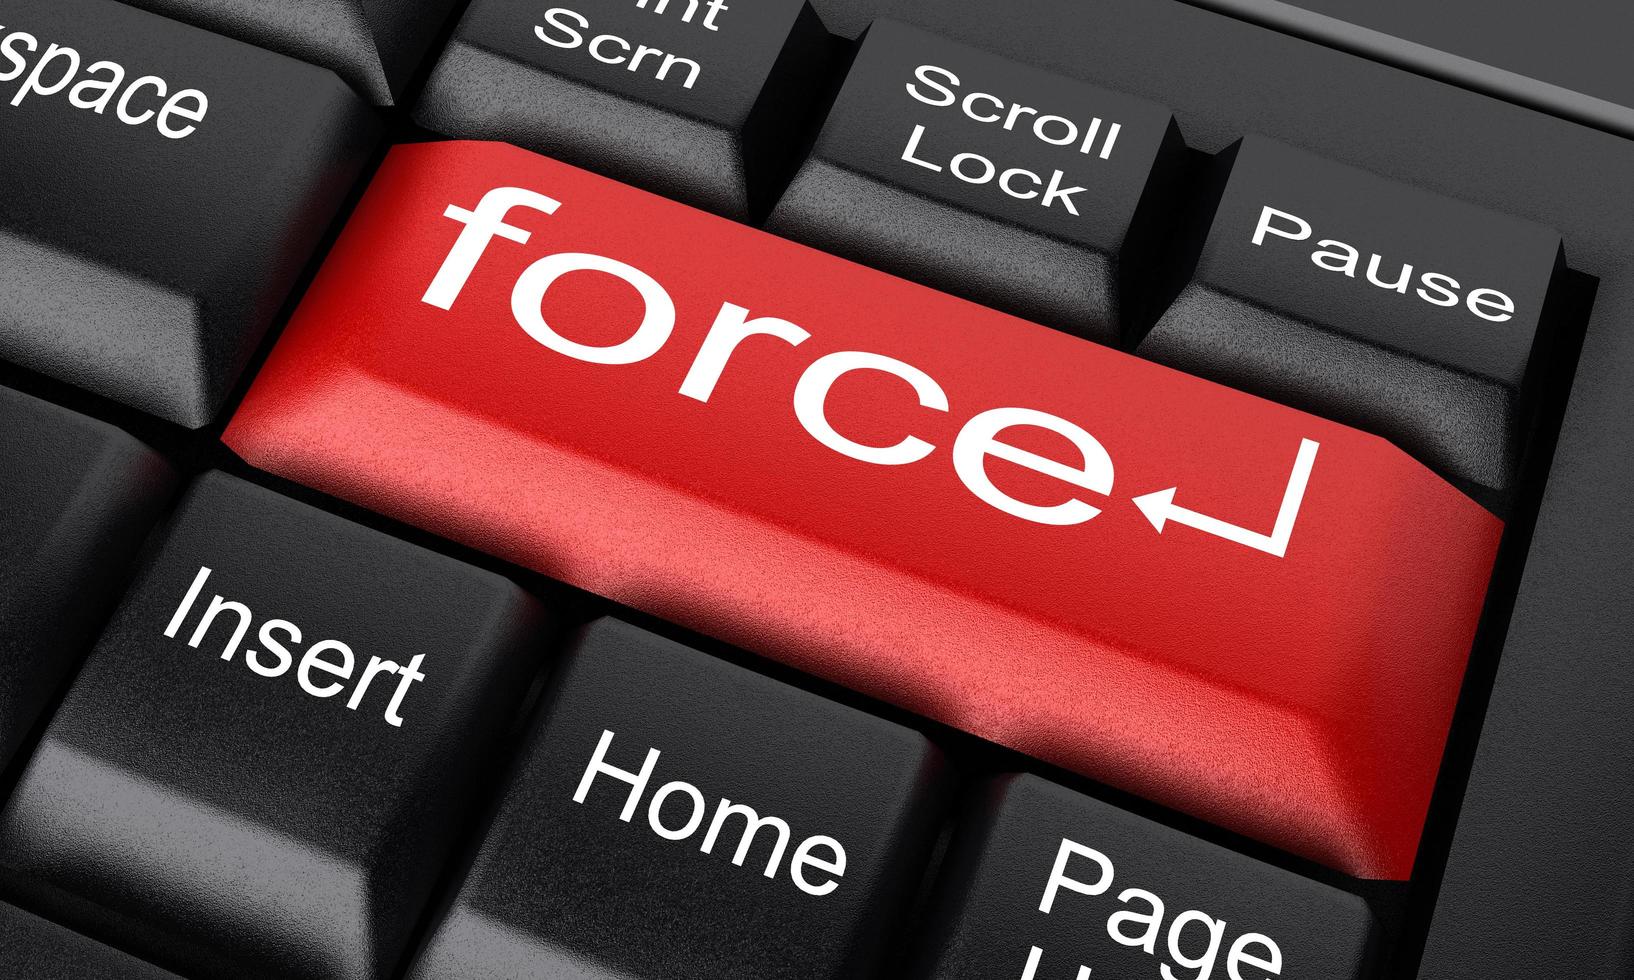 force word on red keyboard button photo